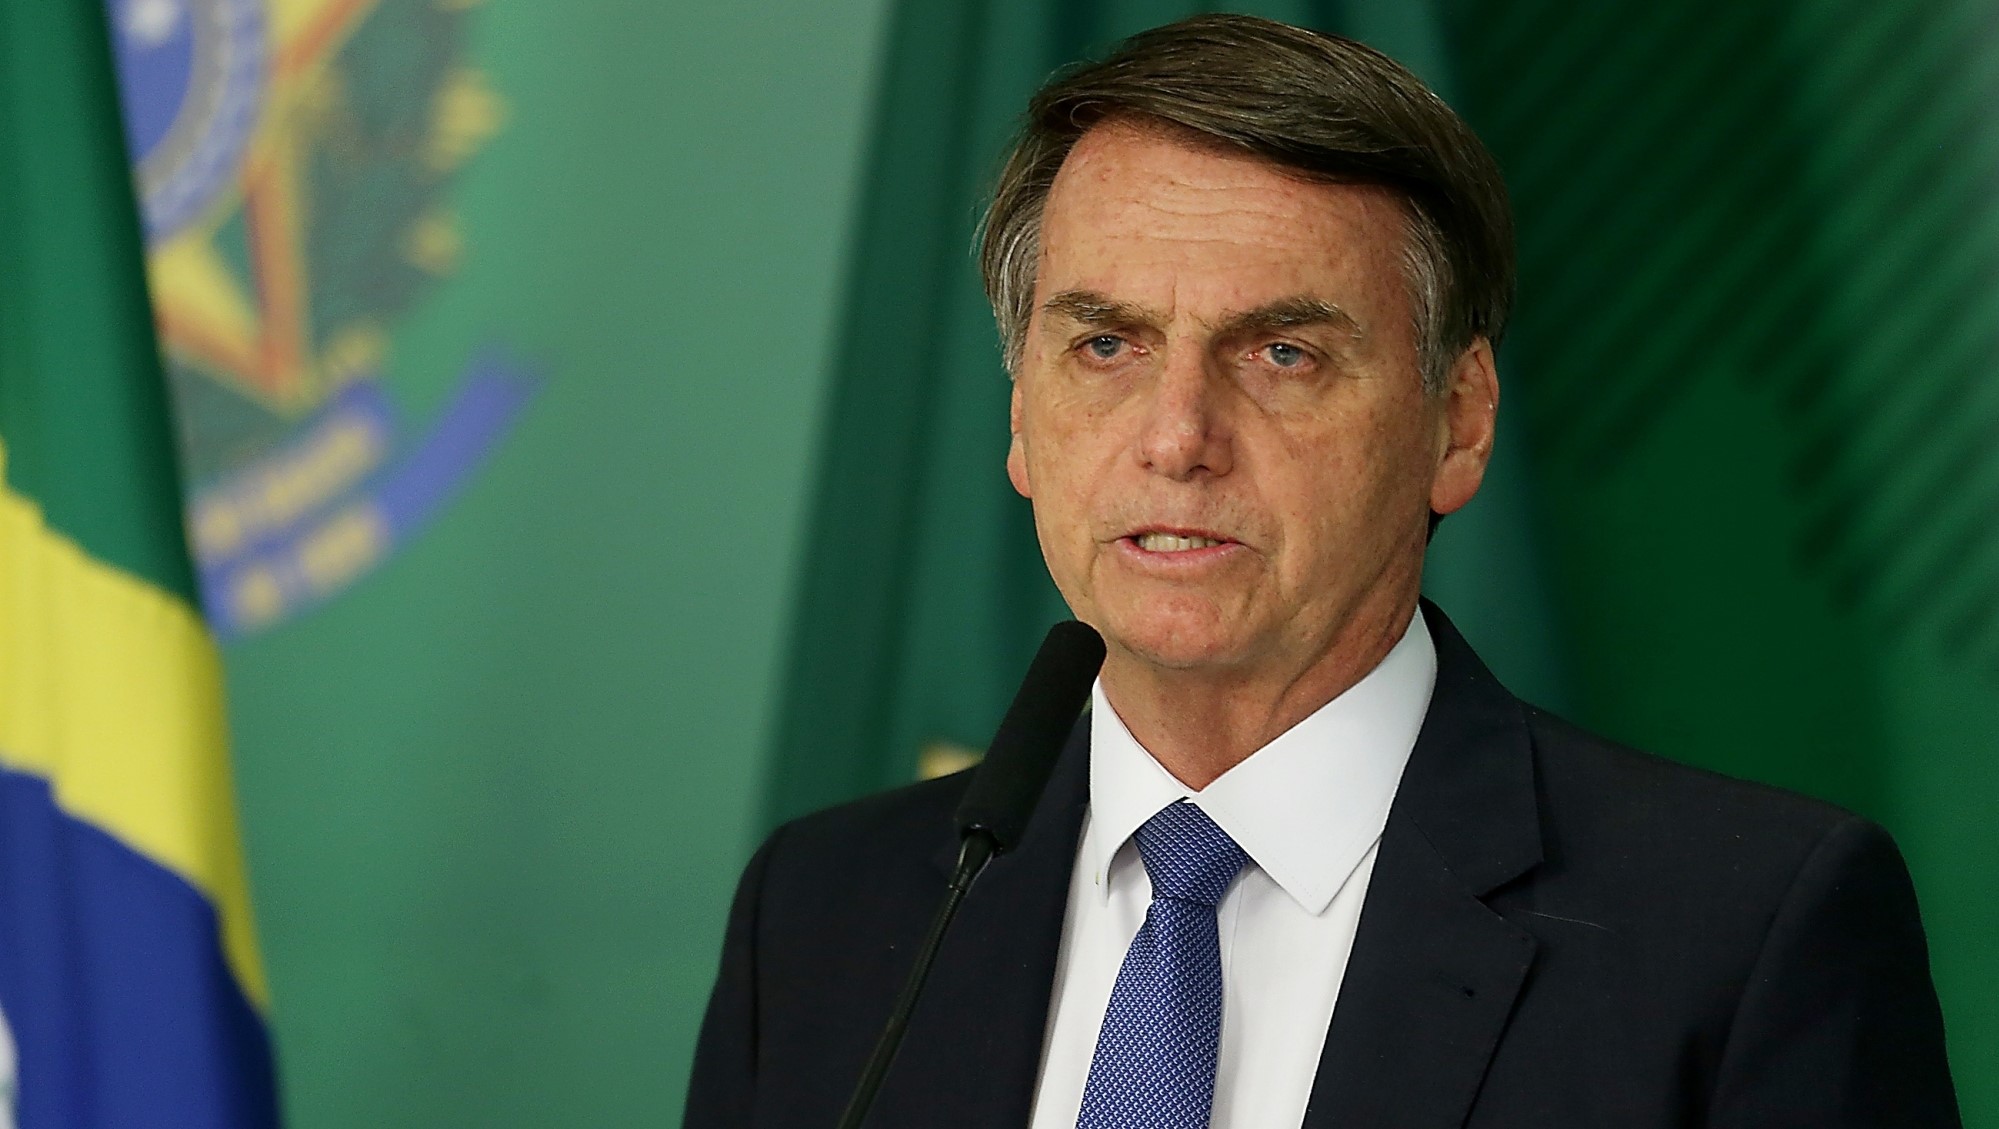 Brazil's Bolsonaro to have surgery after returning from United States -doctor